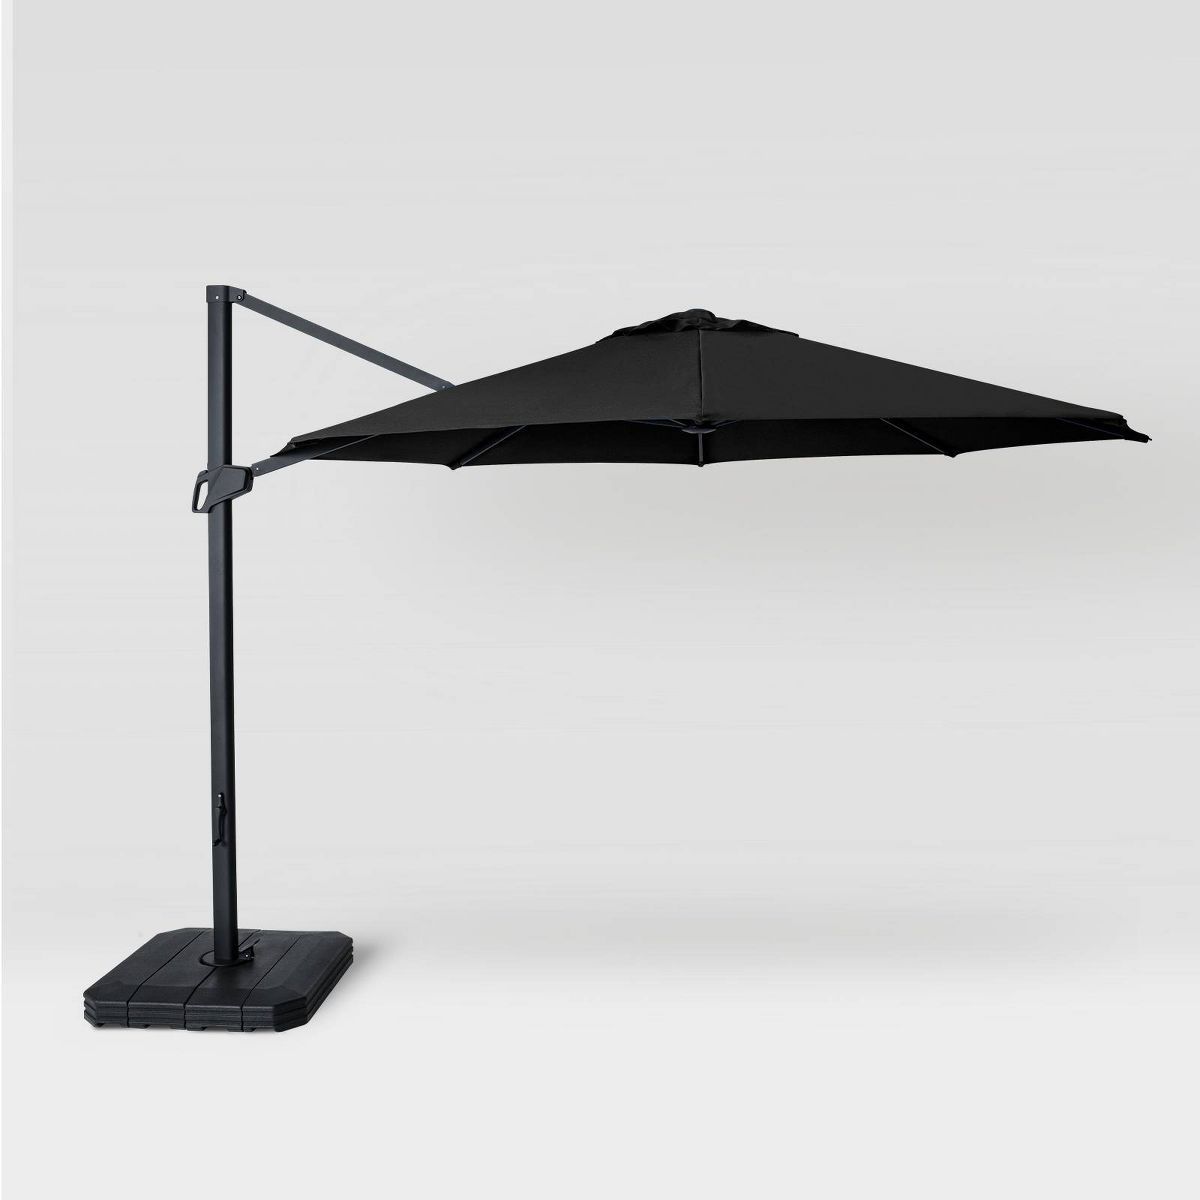 11' Round Offset Outdoor Patio Cantilever Umbrella Black with Black Pole - Threshold™ | Target